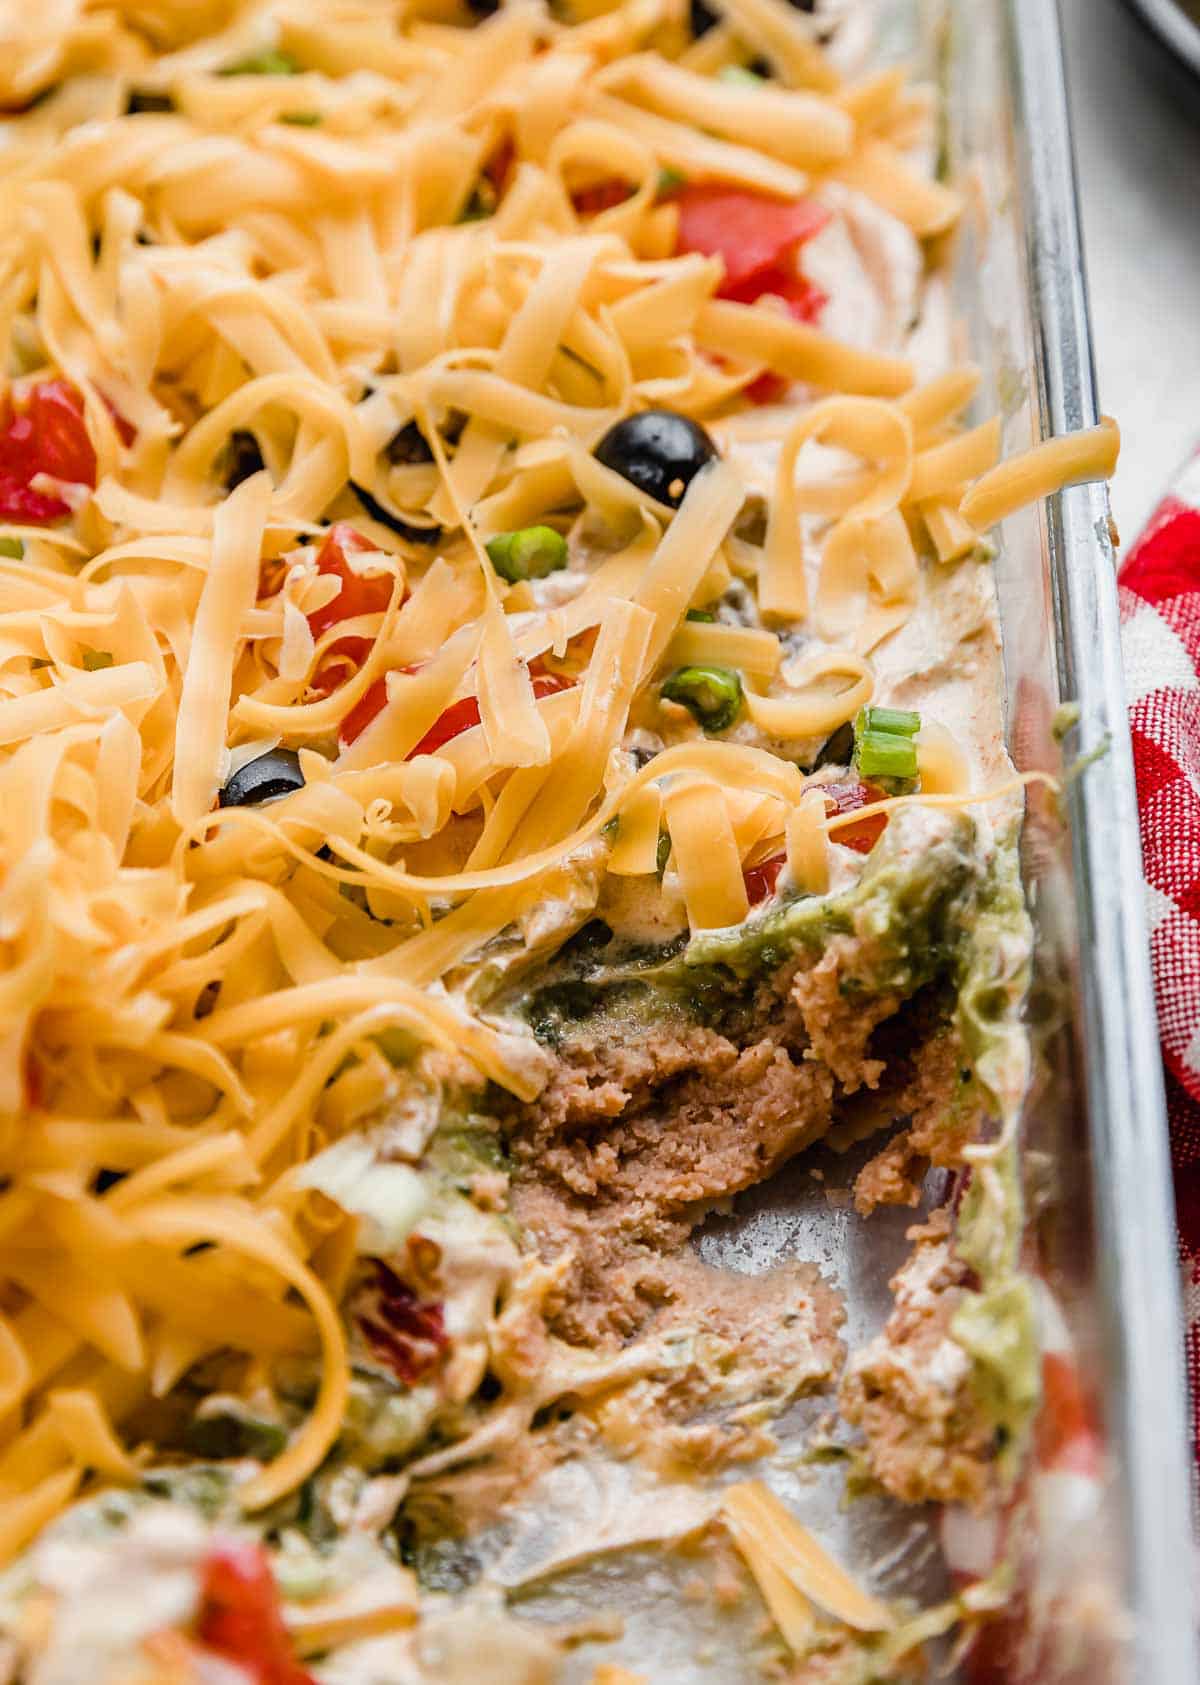 Layered Taco Dip in a glass baking dish, refried beans, guacamole, tomatoes, and cheddar cheese topped dip.